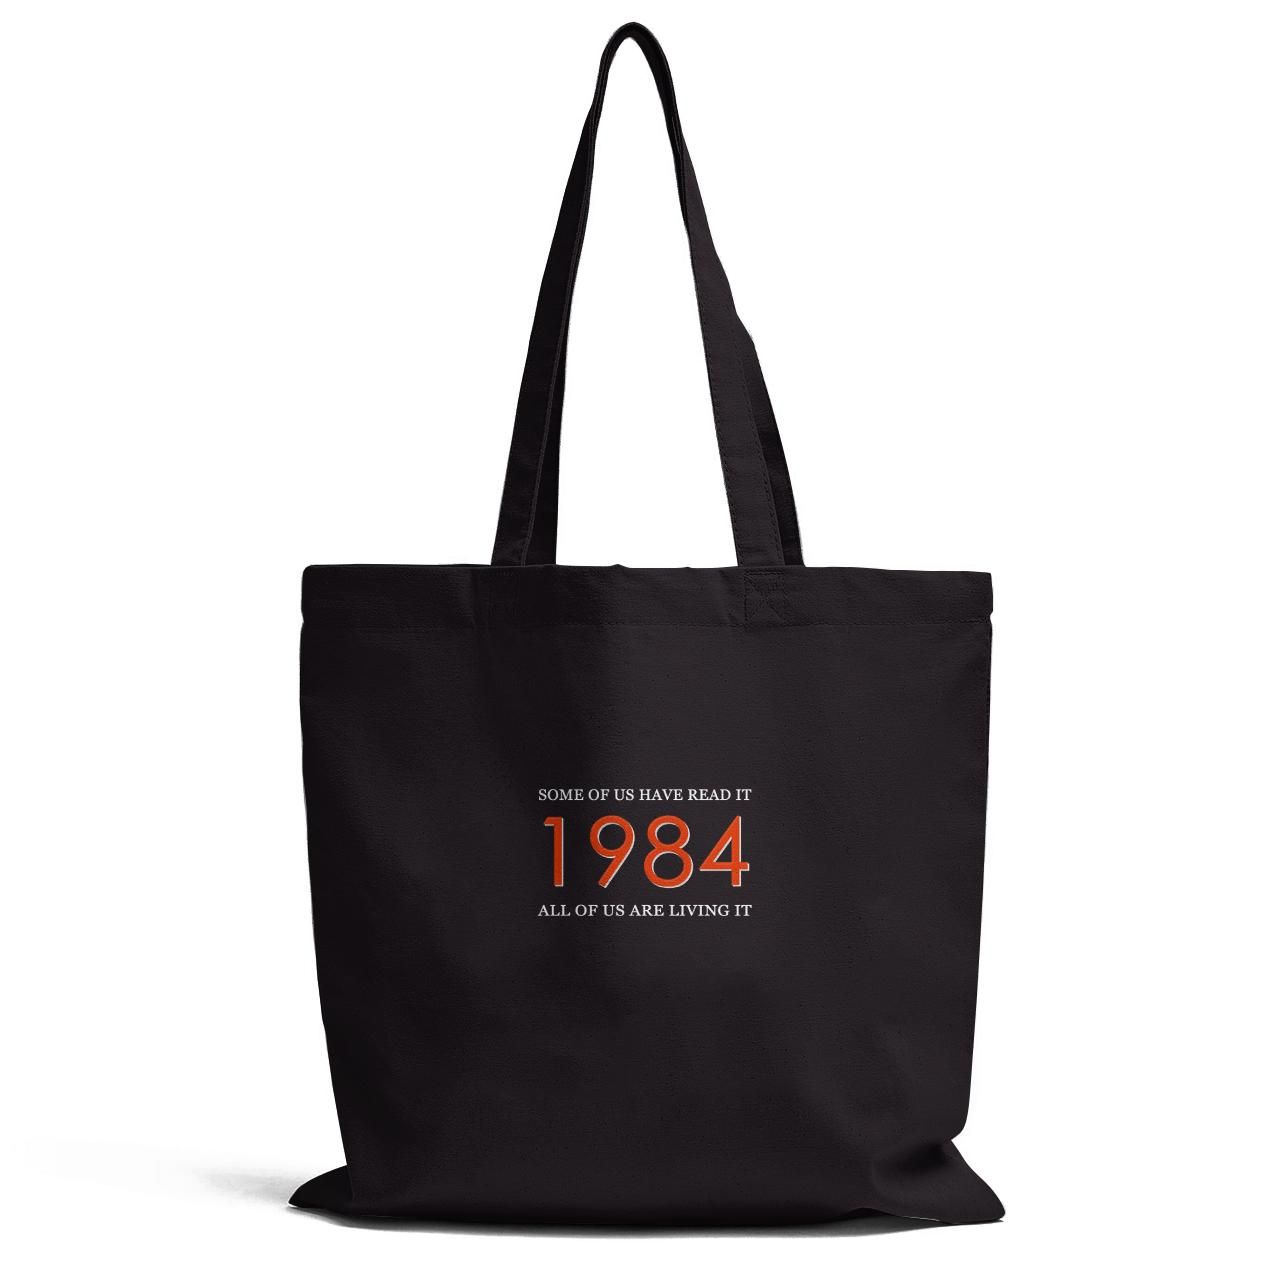 Some Of Ys Have Read It 1984 All Os Us Living It Tote Bag